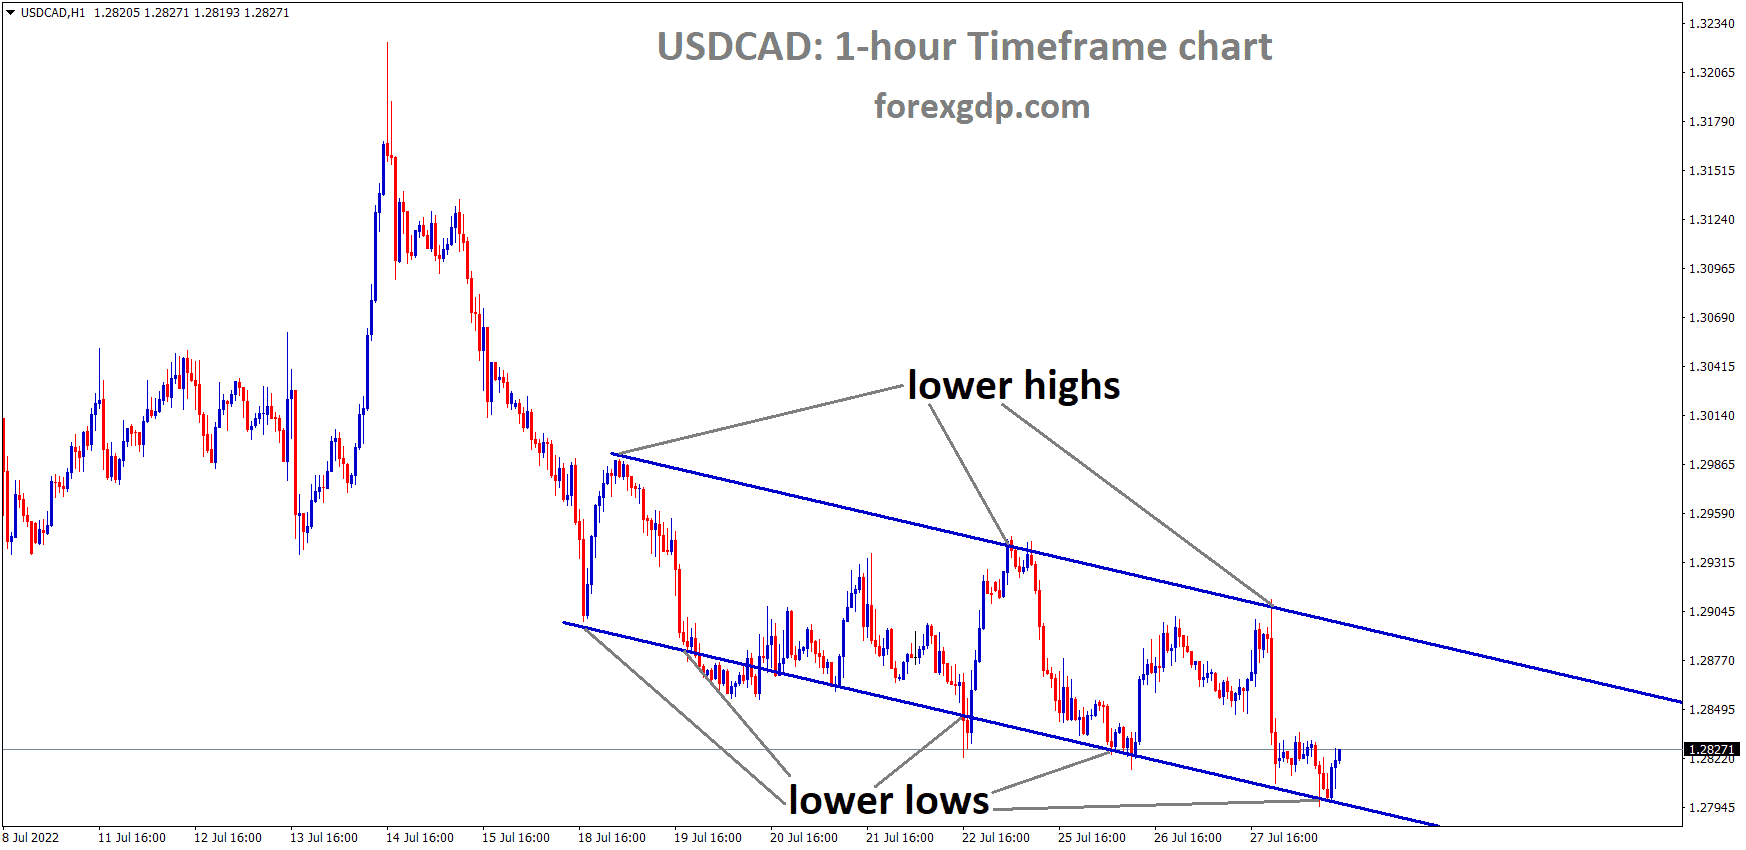 USDCAD H1 TF analysis Market is moving in the Descending channel and the Market has rebounded from the Lower low area of the channel